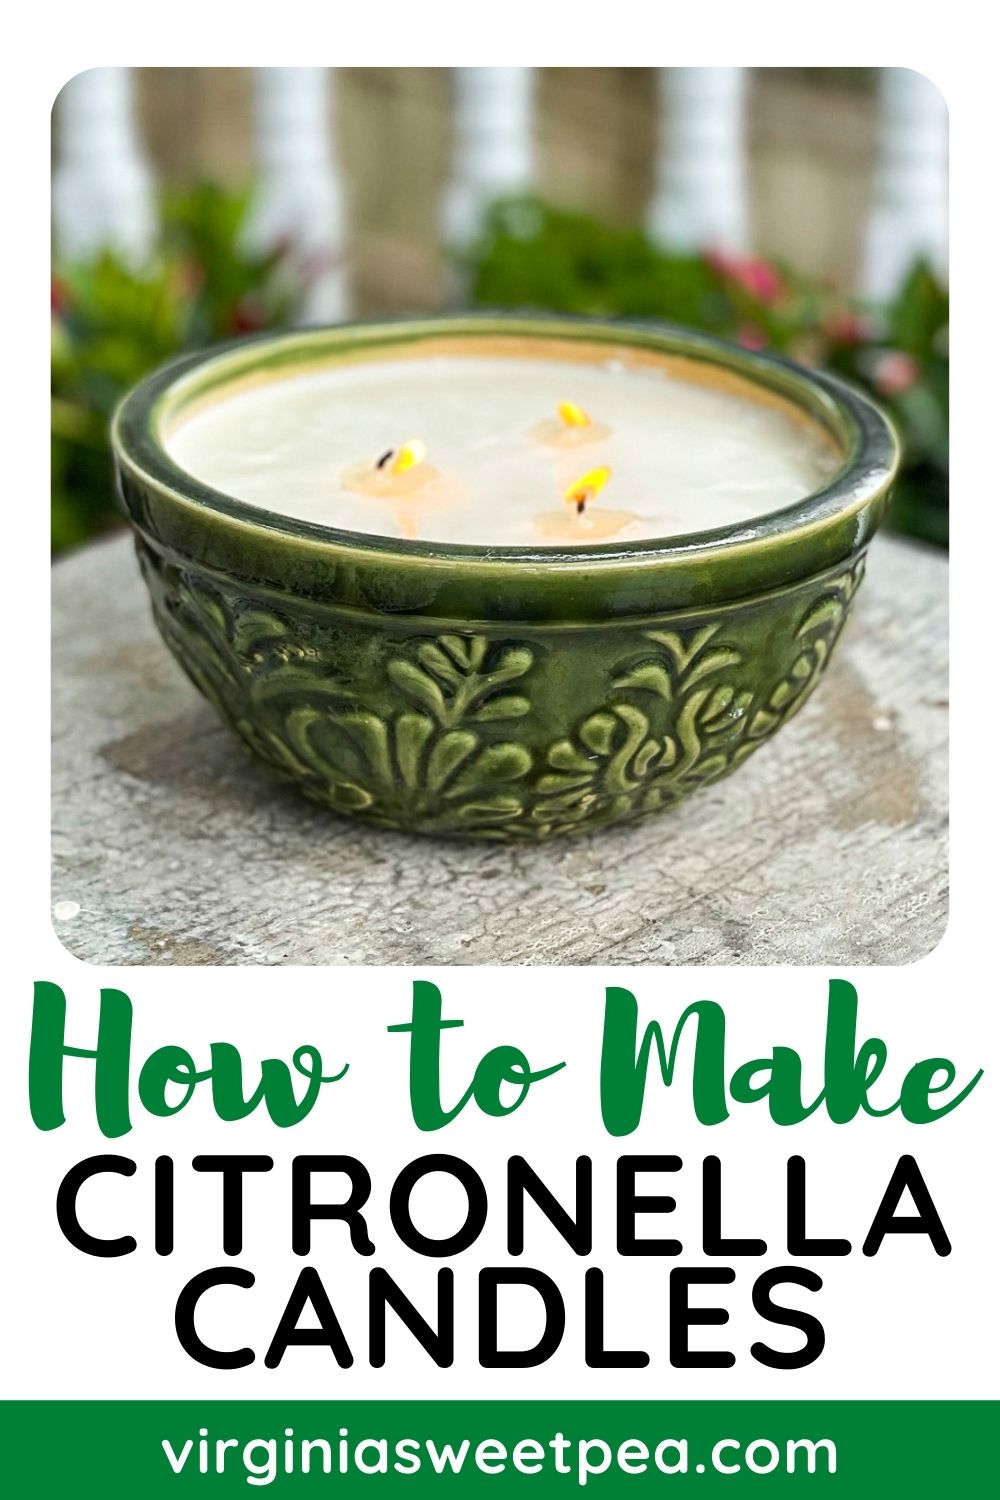 Homemade Citronella candle in an upcycled floral dish garden pot